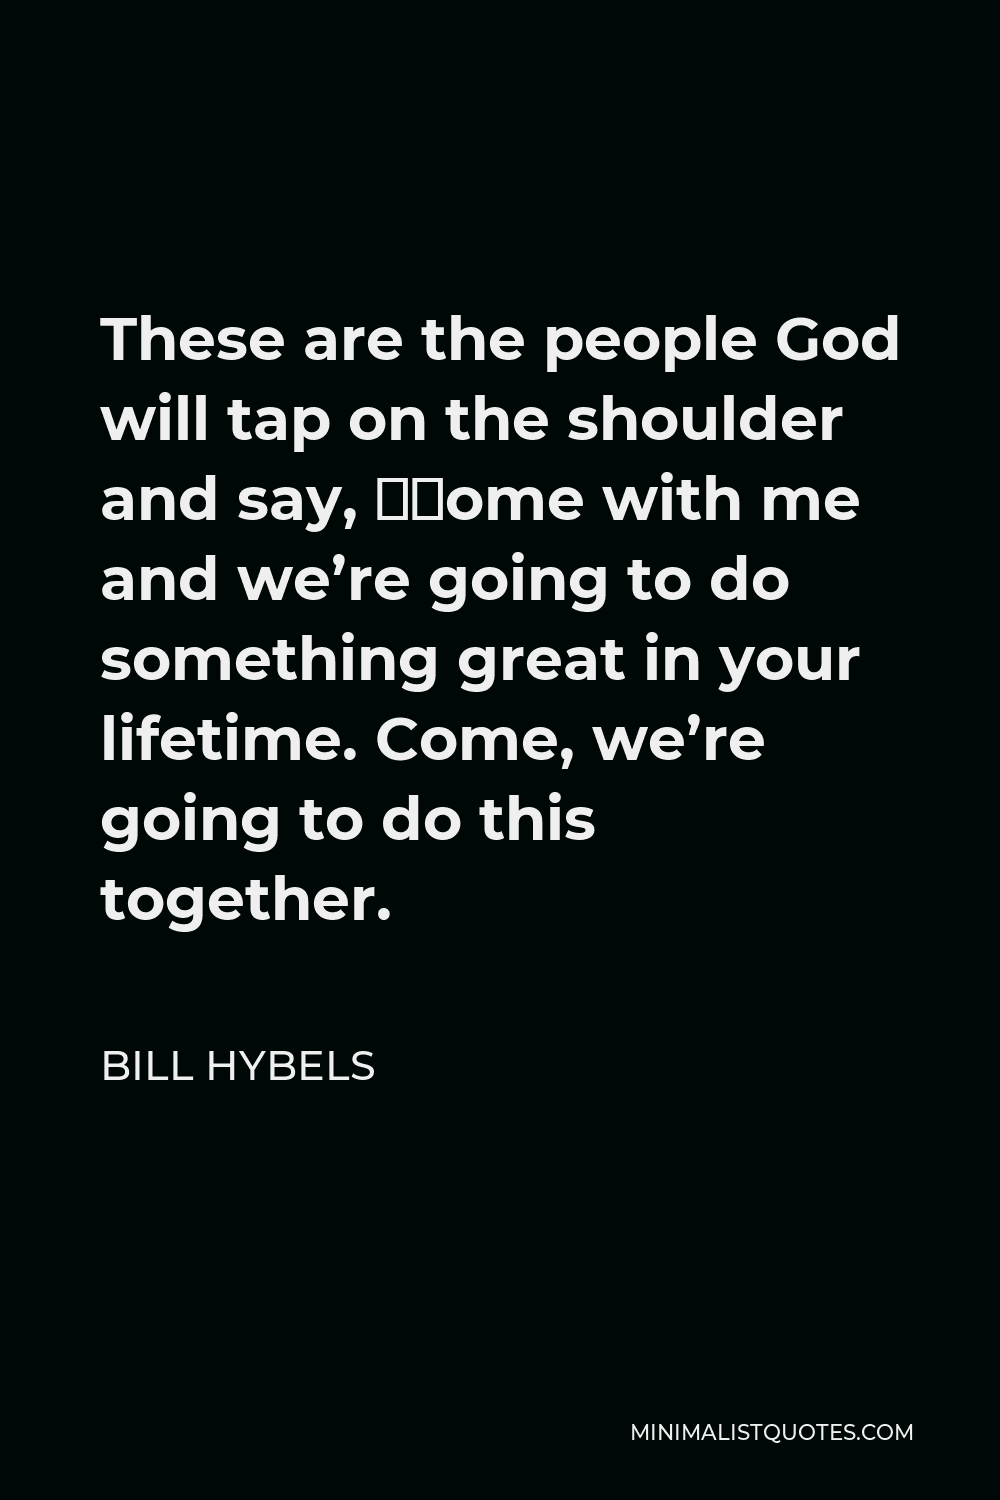 Bill Hybels Quote - These are the people God will tap on the shoulder and say, “Come with me and we’re going to do something great in your lifetime. Come, we’re going to do this together.